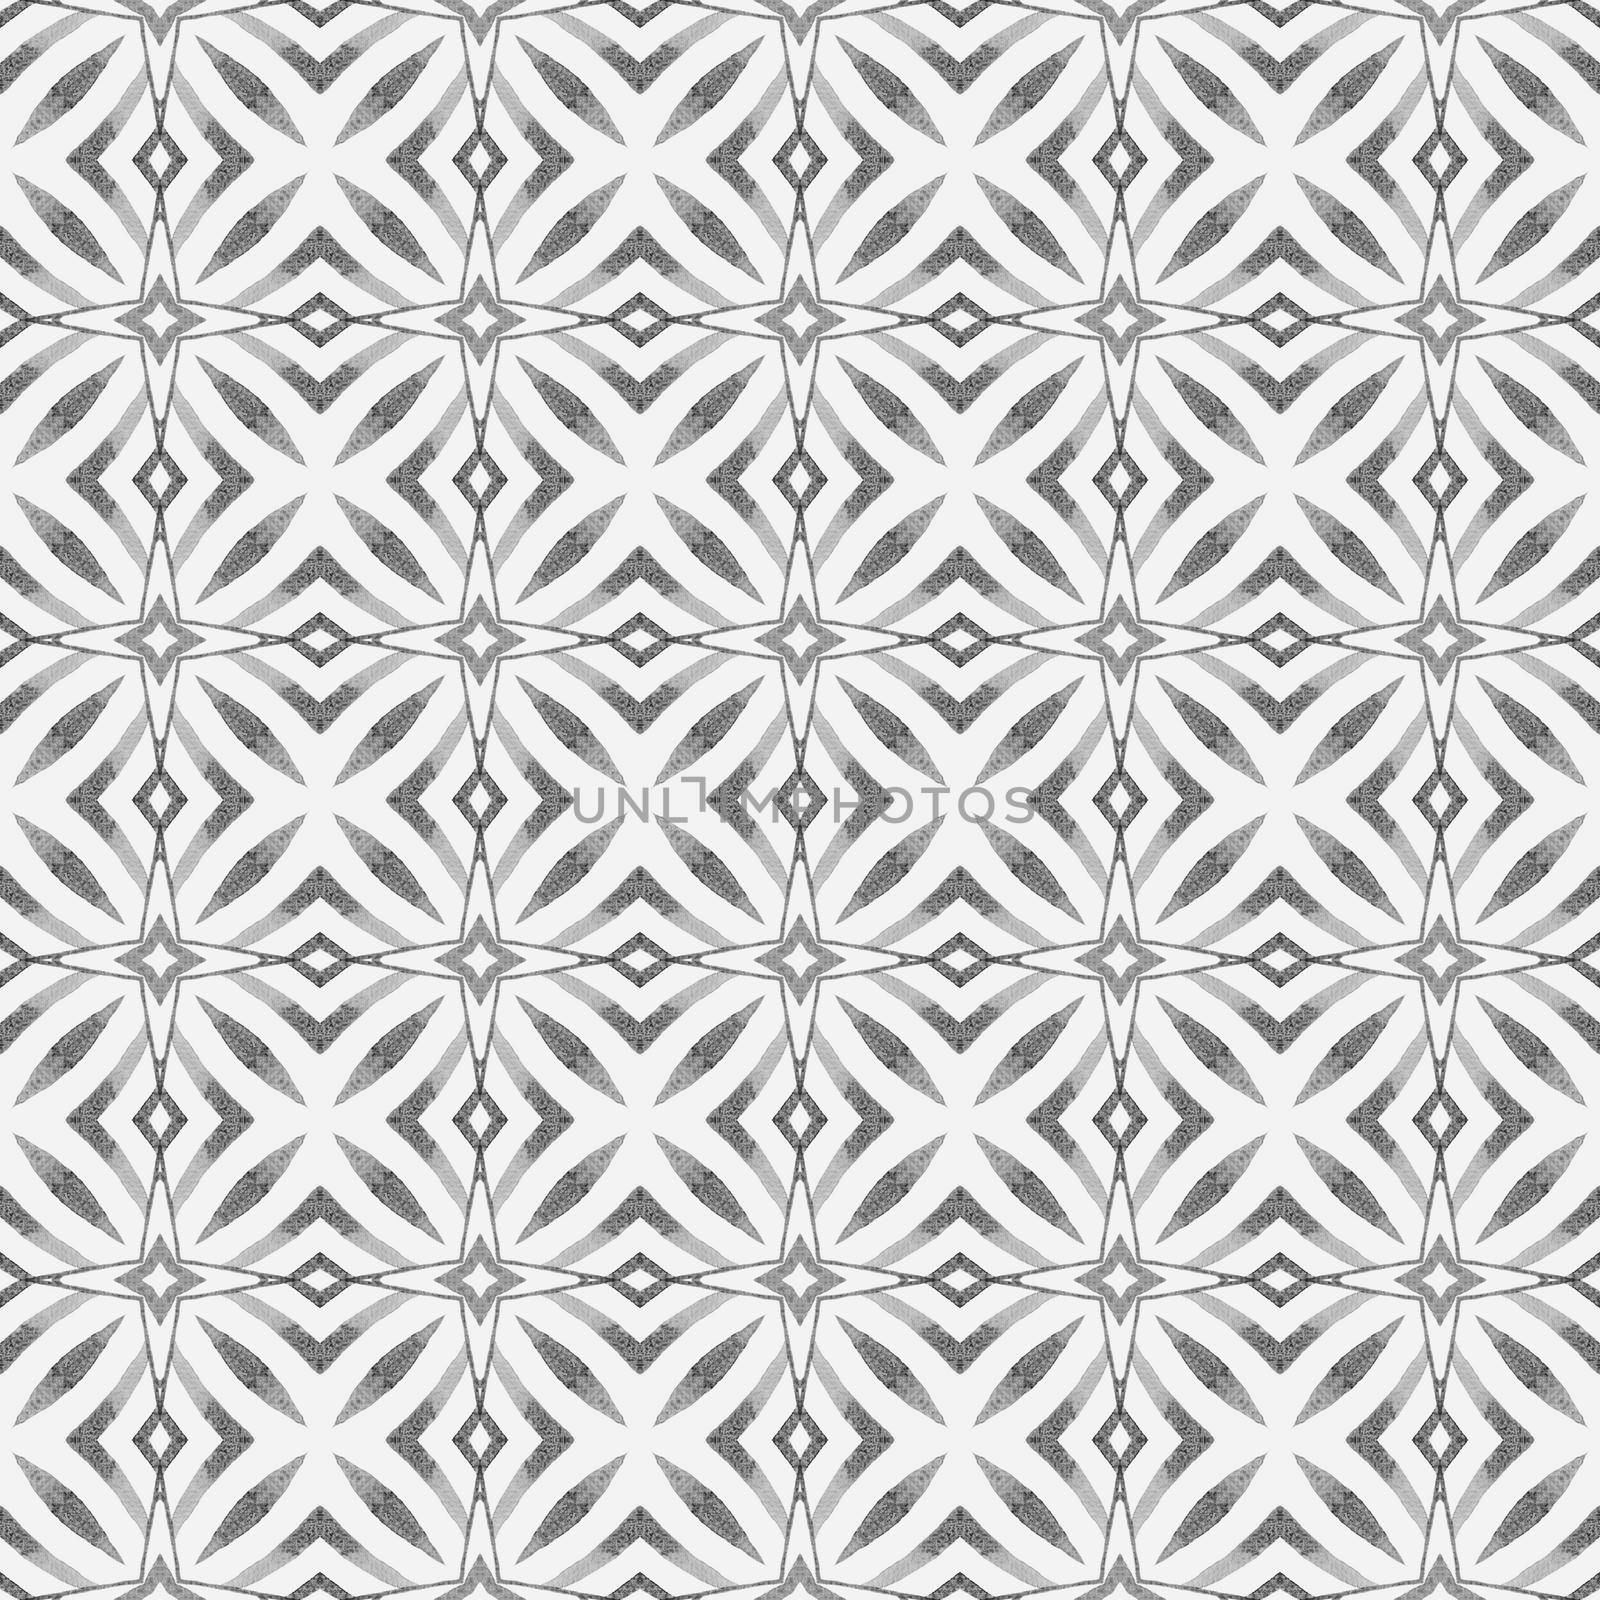 Exotic seamless pattern. Black and white pleasing boho chic summer design. Summer exotic seamless border. Textile ready quaint print, swimwear fabric, wallpaper, wrapping.